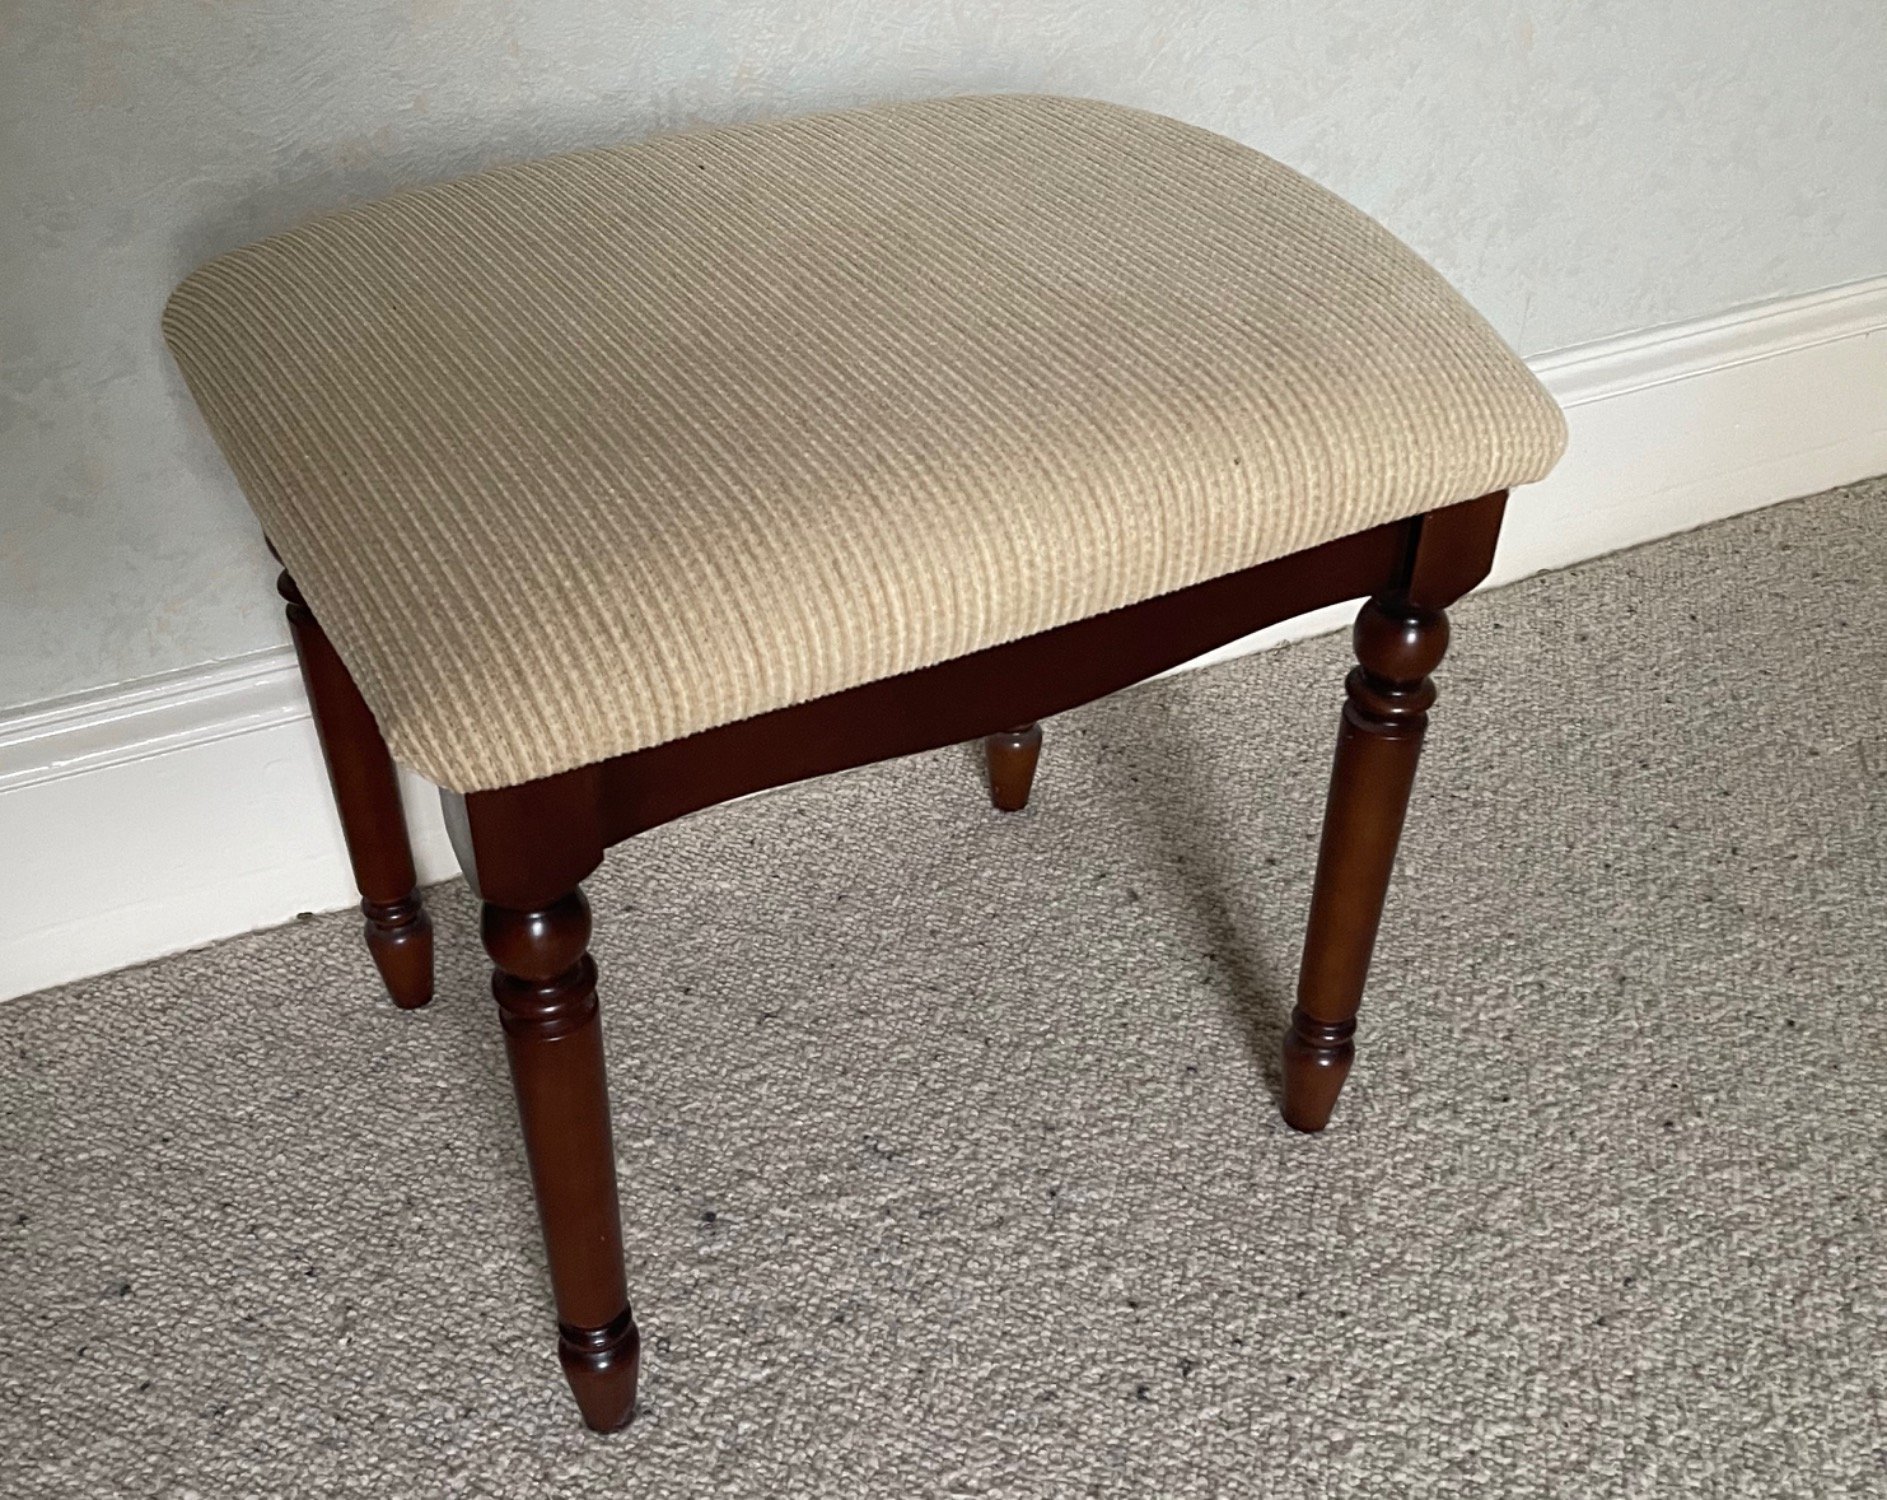 A dressing-table stool with cream upholstery